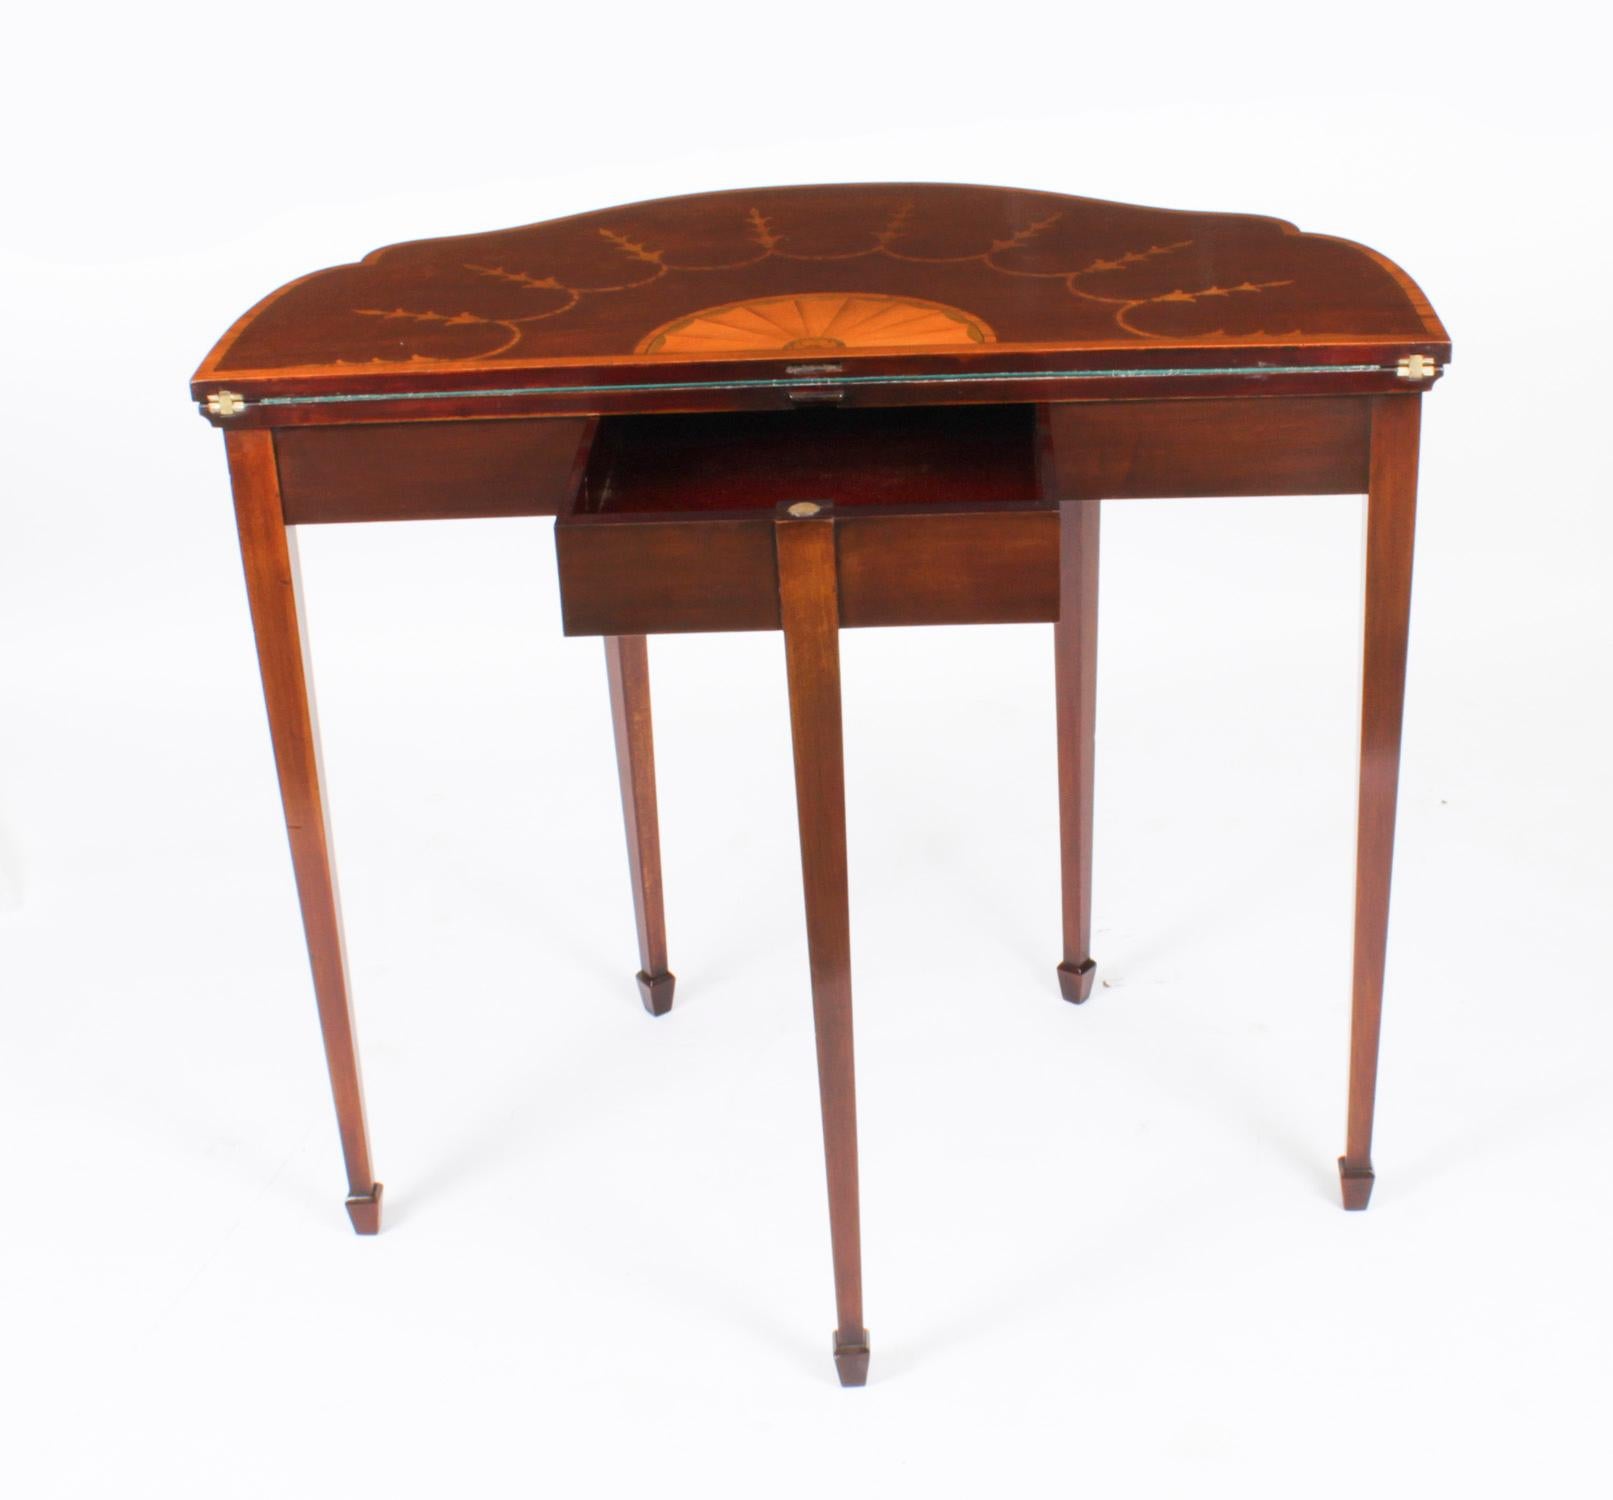 Antique Mahogany and Satinwood Inlaid Serpentine Card Console Table 19th Century For Sale 11